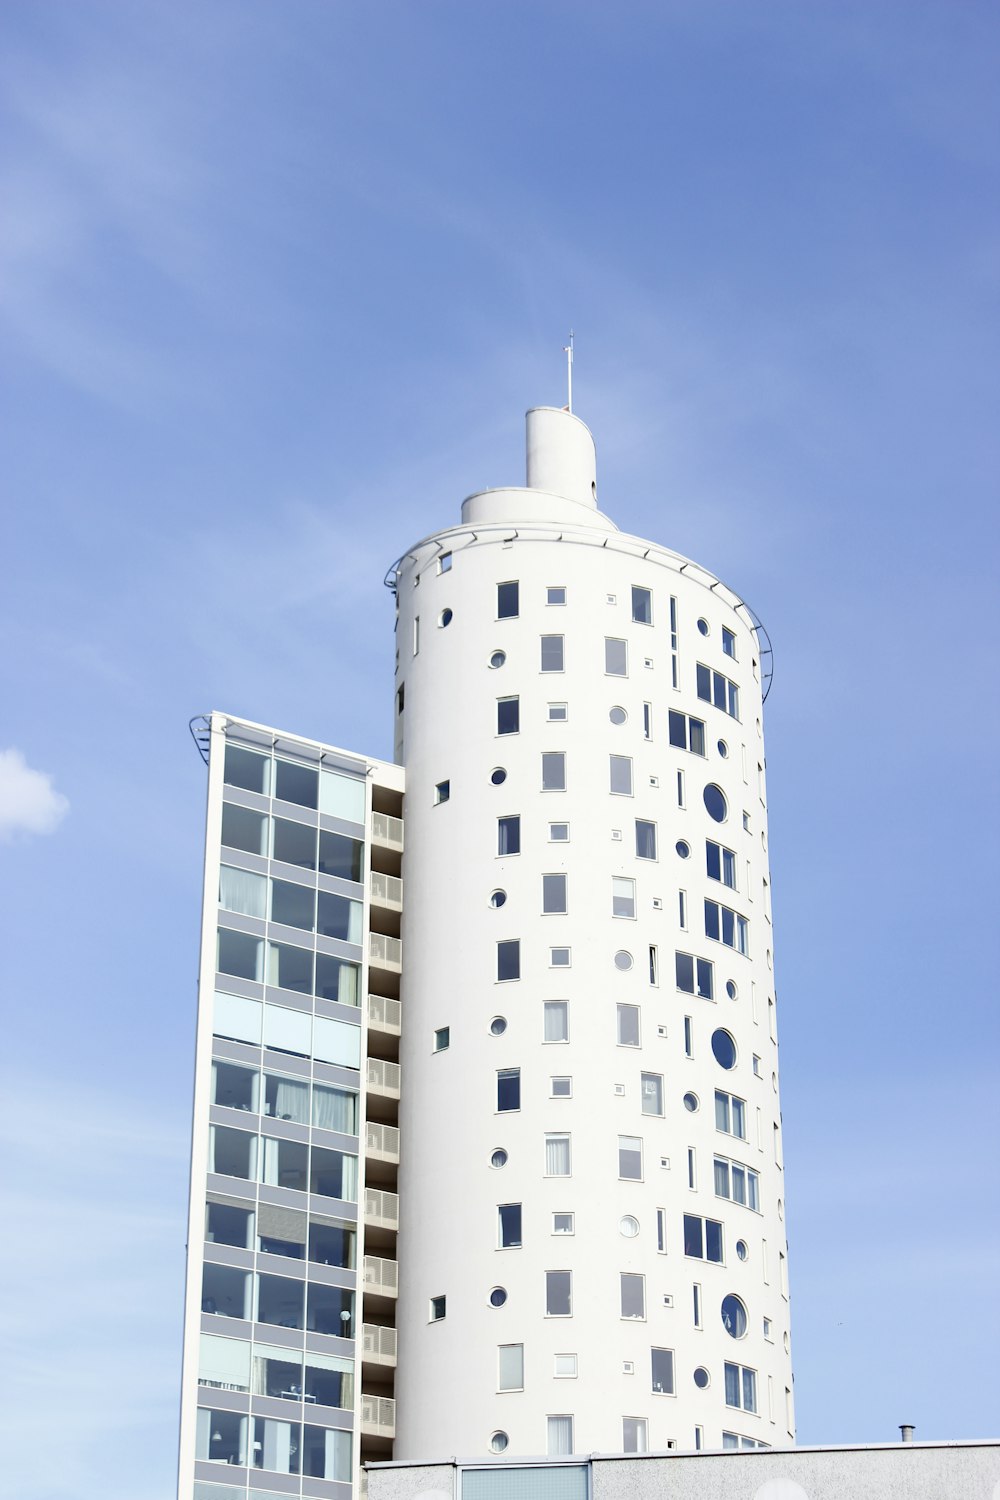 white tower building under blue and white sky during daytime